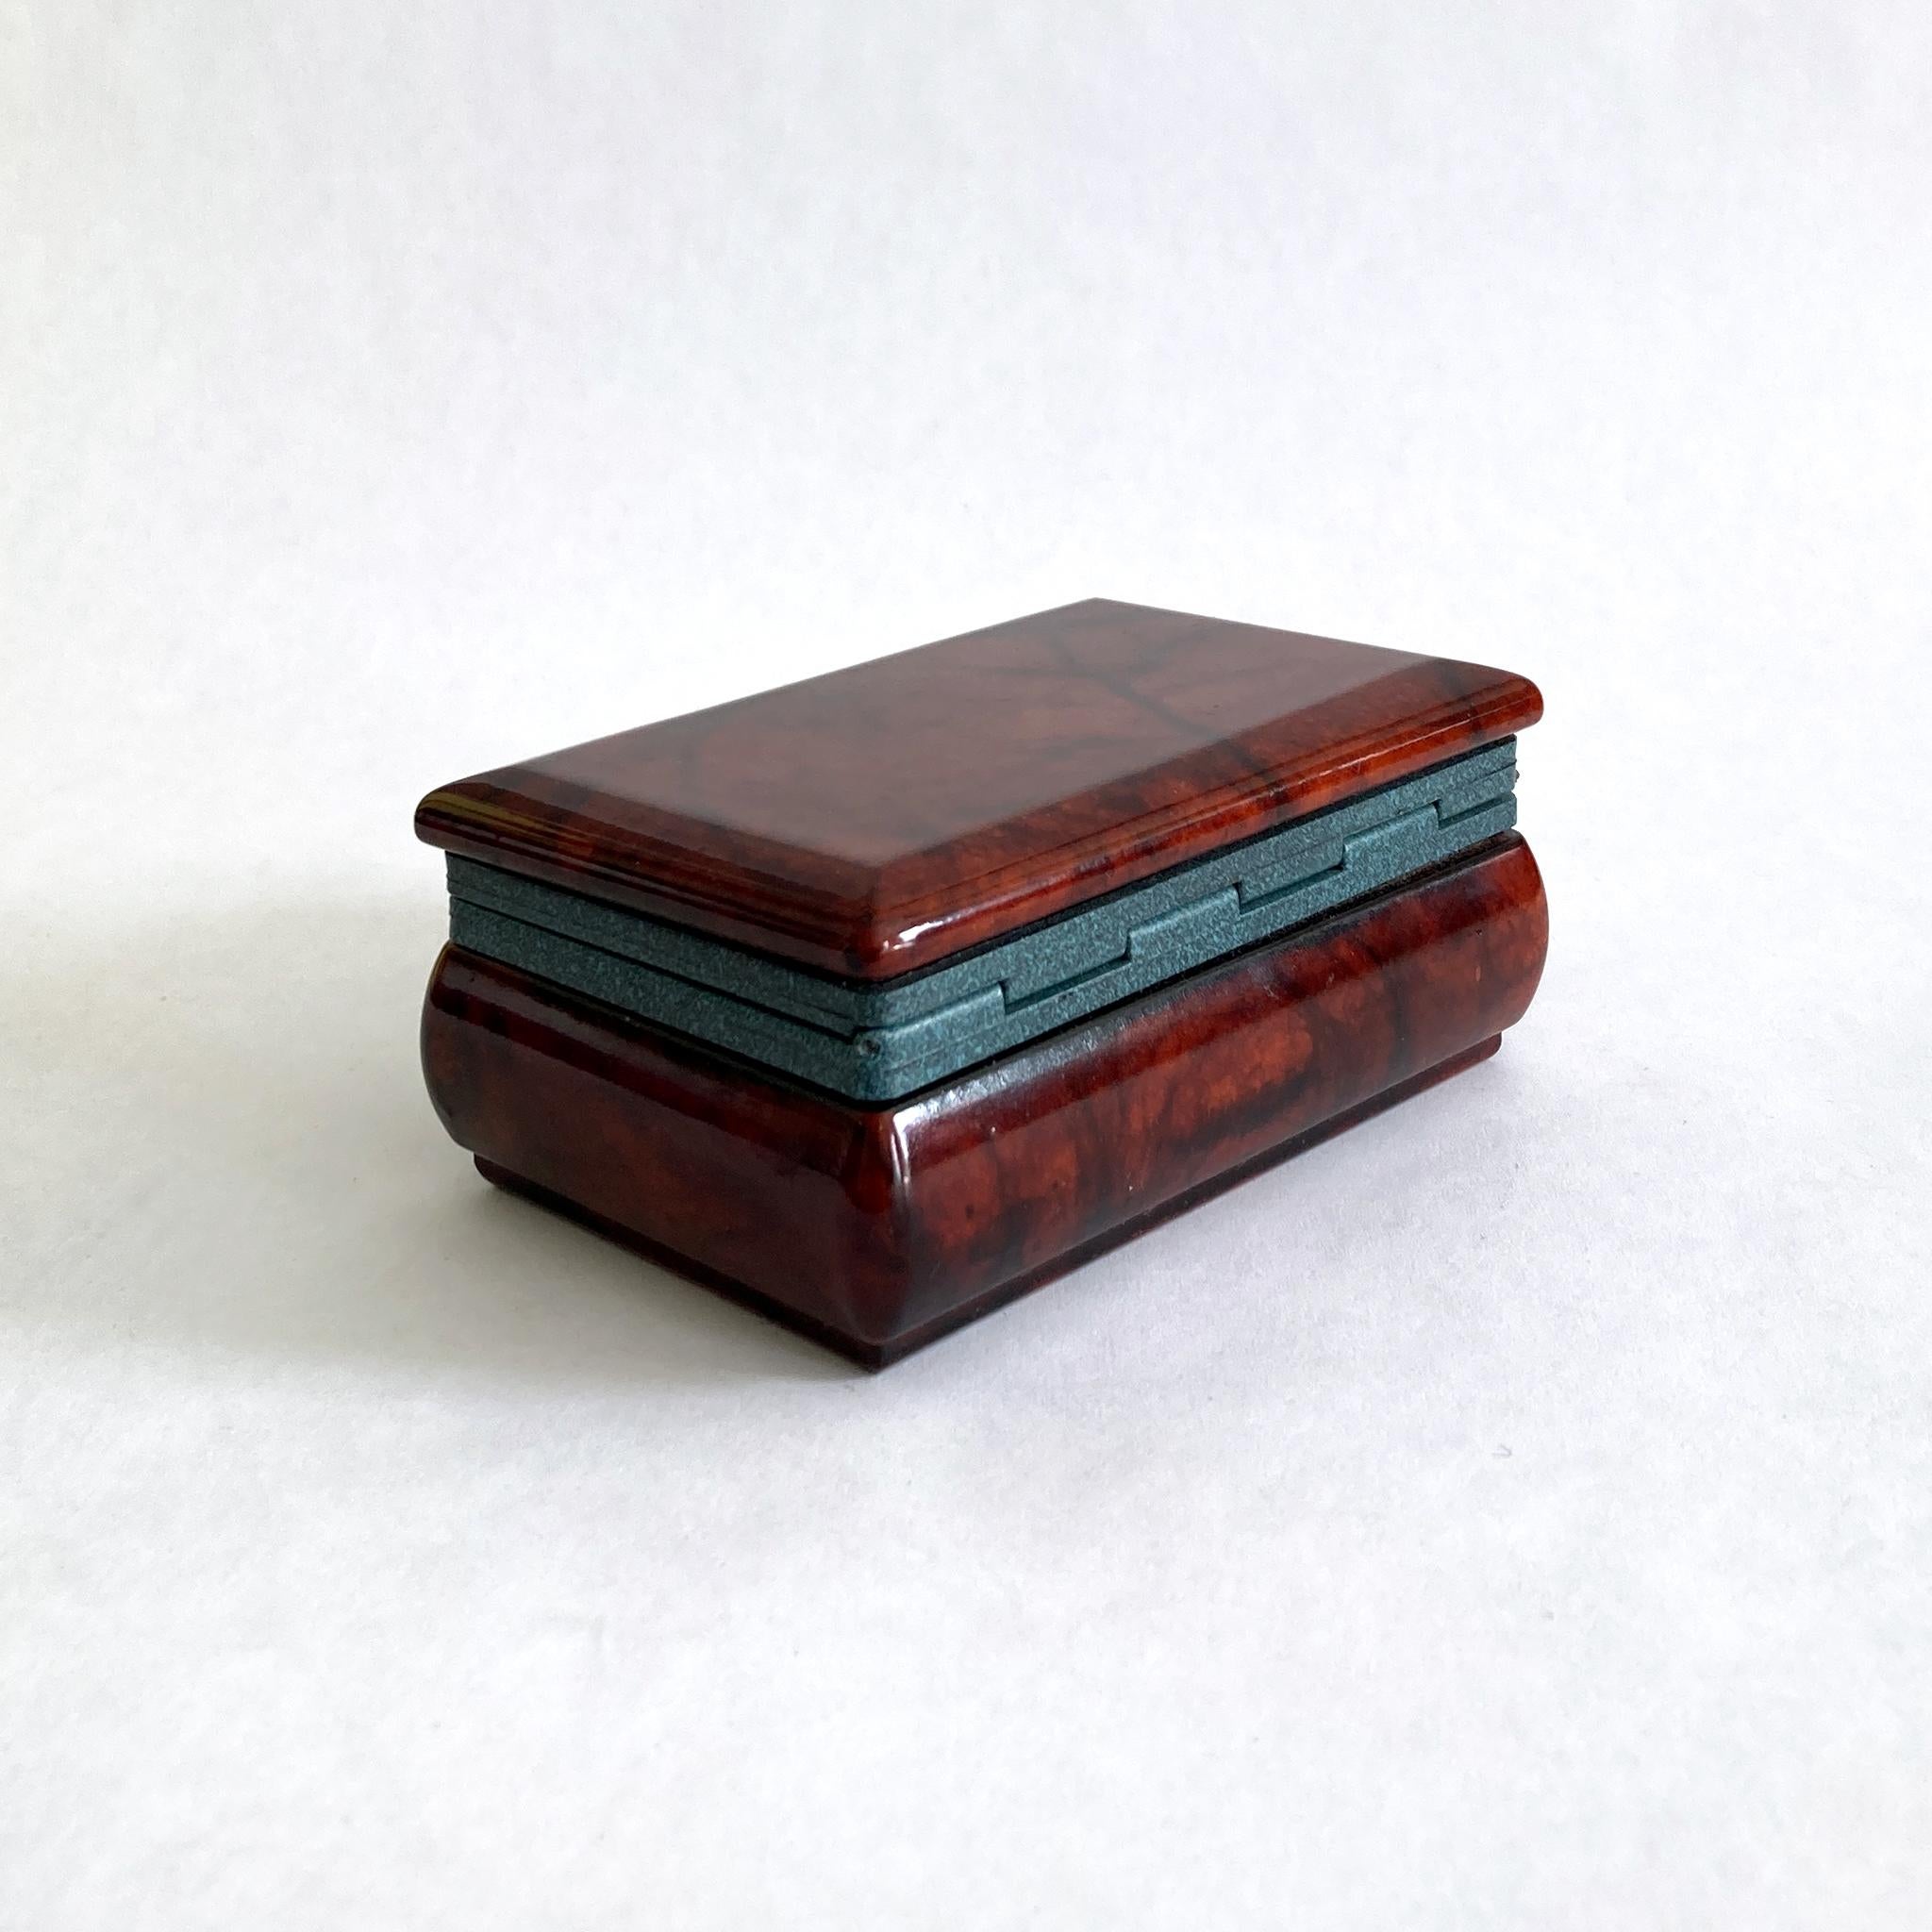 Late 20th Century Alabaster Rectangular Hinged Box in Brown Red with Blue Hinge, Italian, 1970s